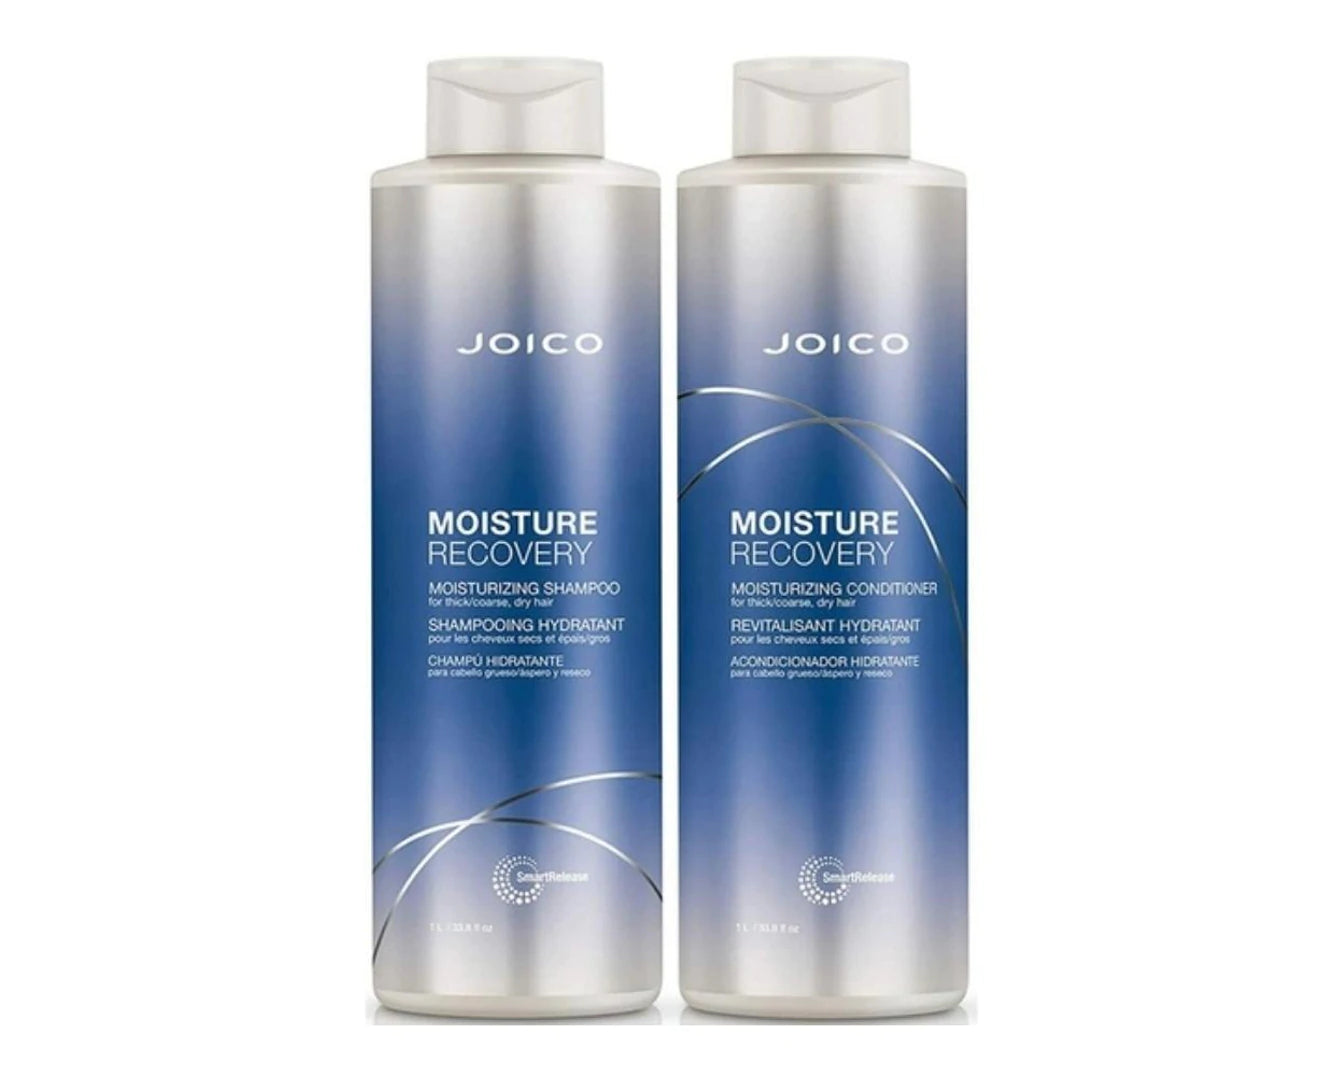 Joico Moisture Recovery Shampoo & Conditioner 1 Litre pack